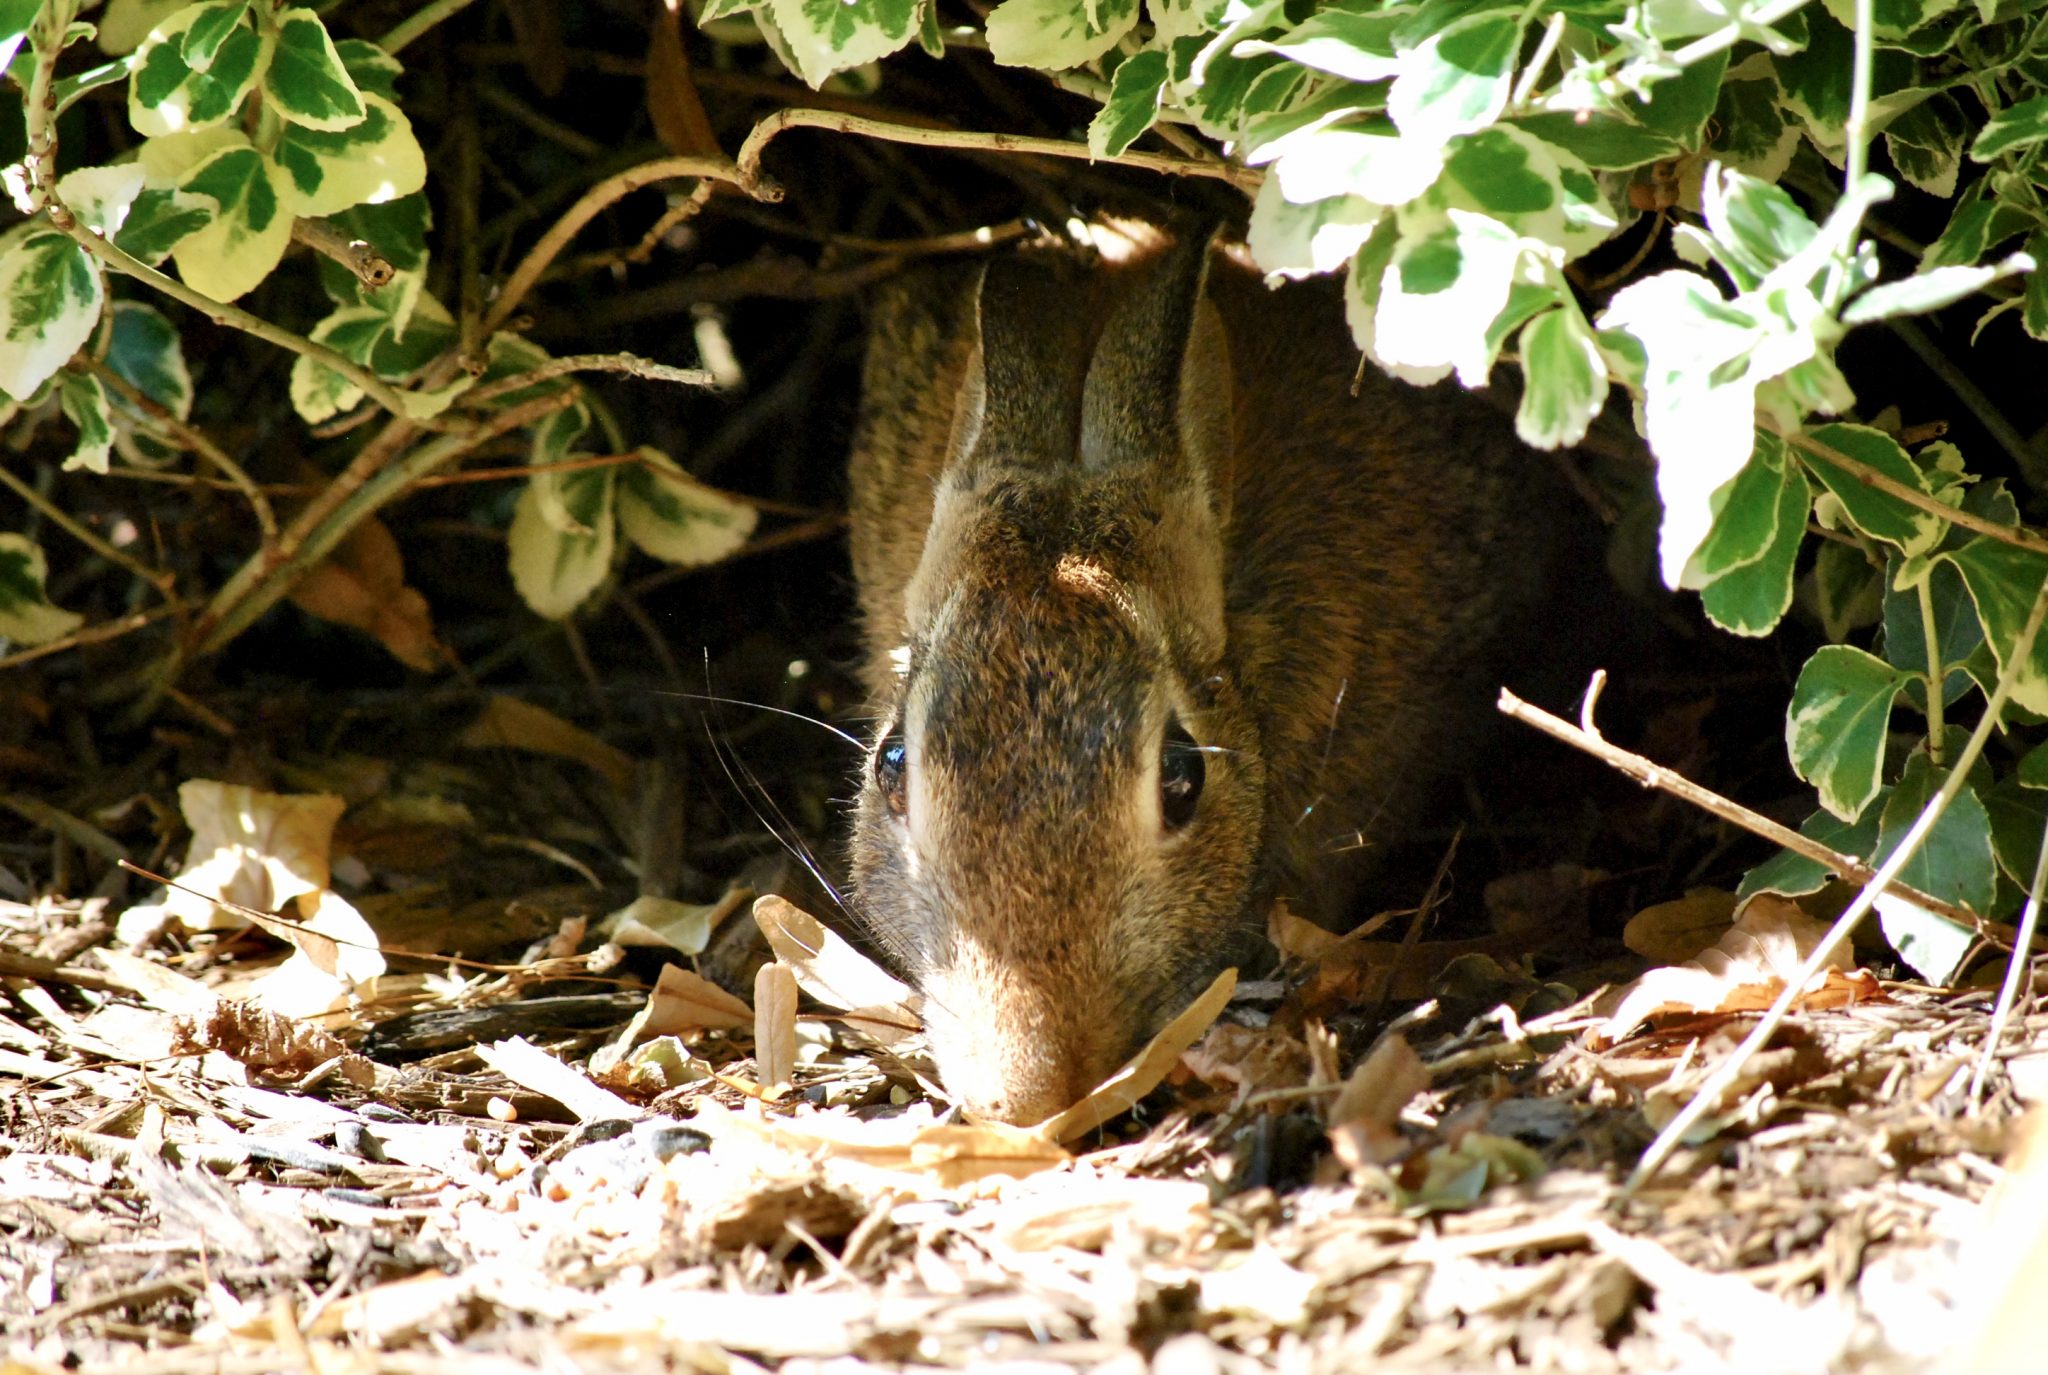 An eastern cottontail rabbit emerges from their den.